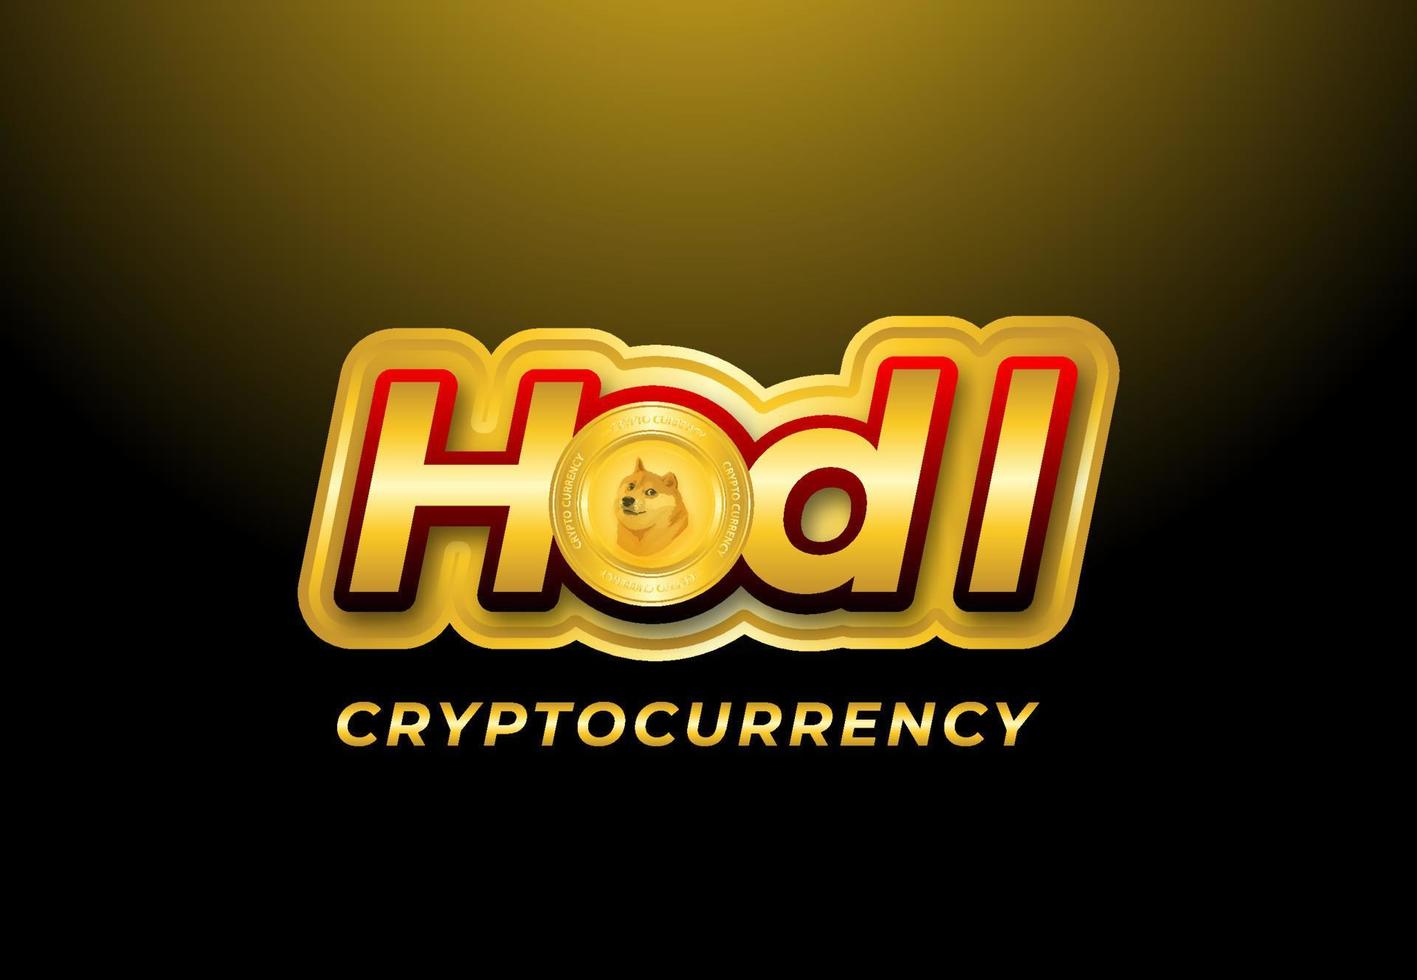 Doge coin cryptocurrency hodl symbol vector